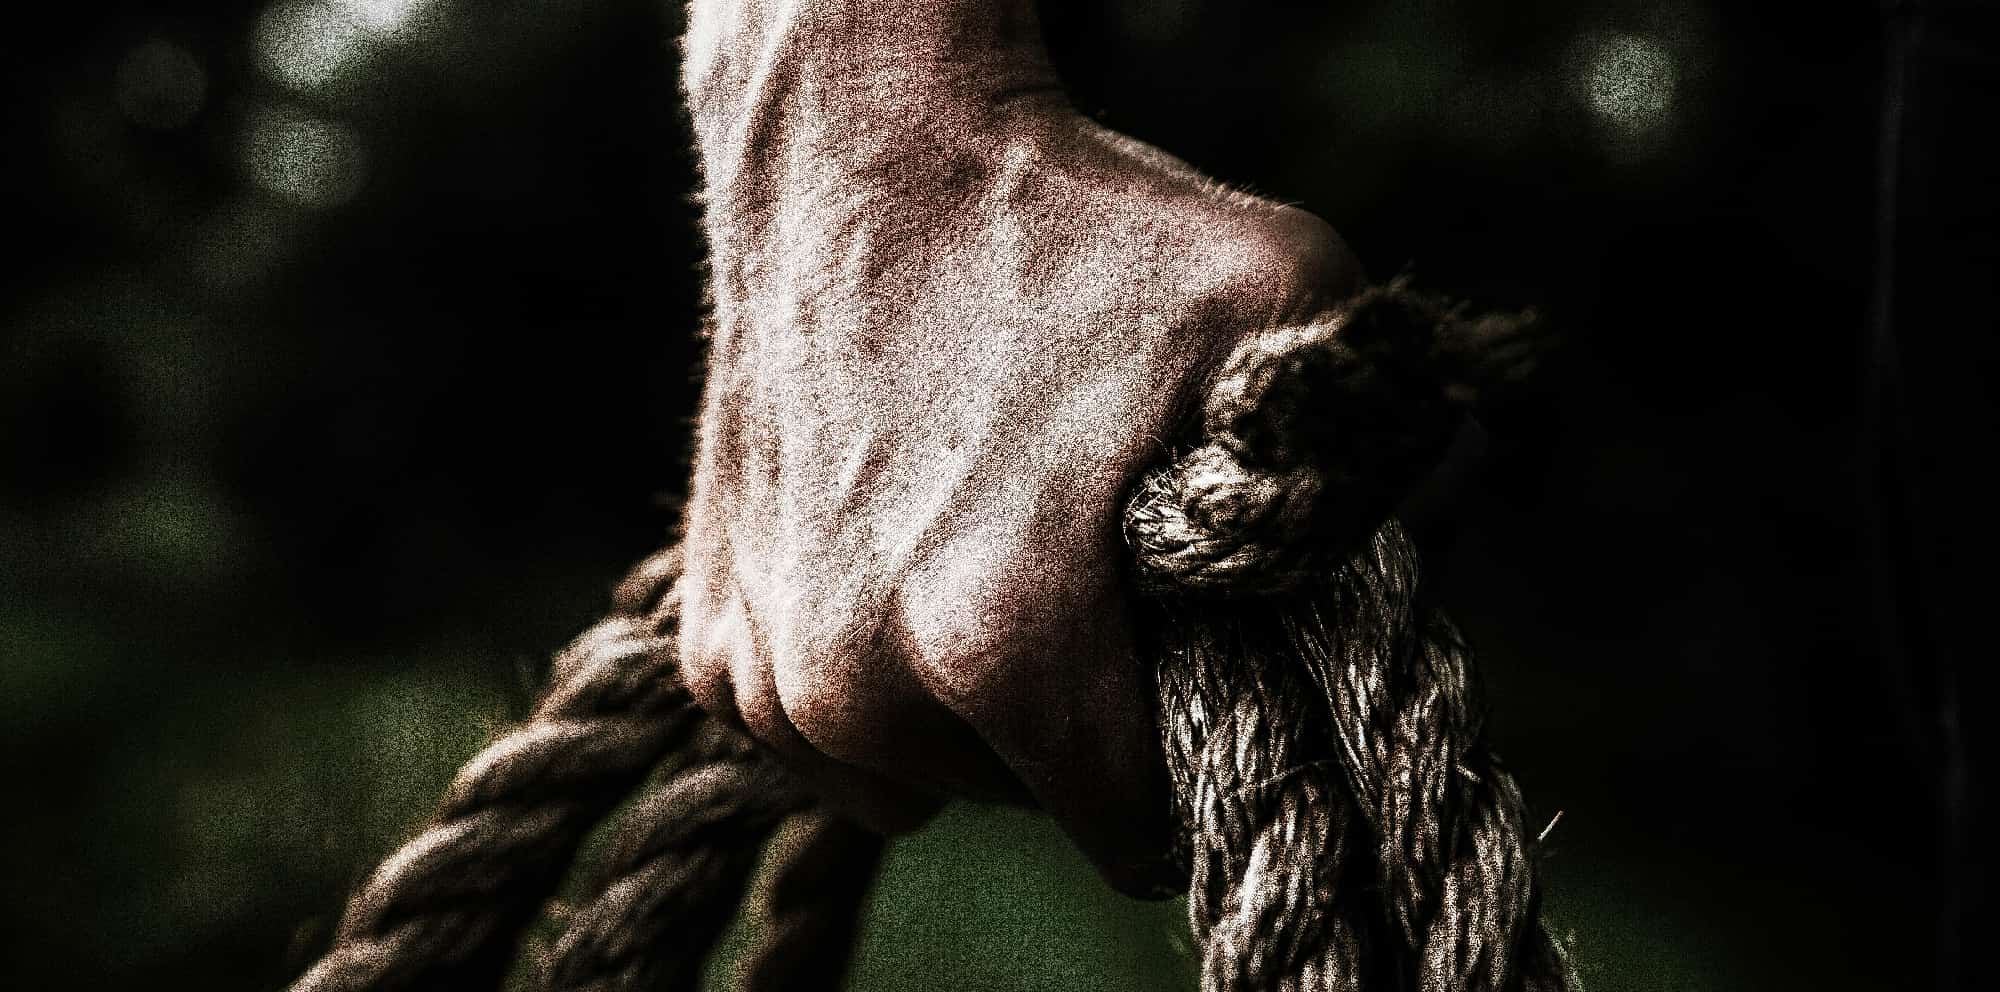 A close-up image showing a pair of white knuckles gripping a rope tightly, representing the struggle and determination involved in overcoming alcohol addiction.